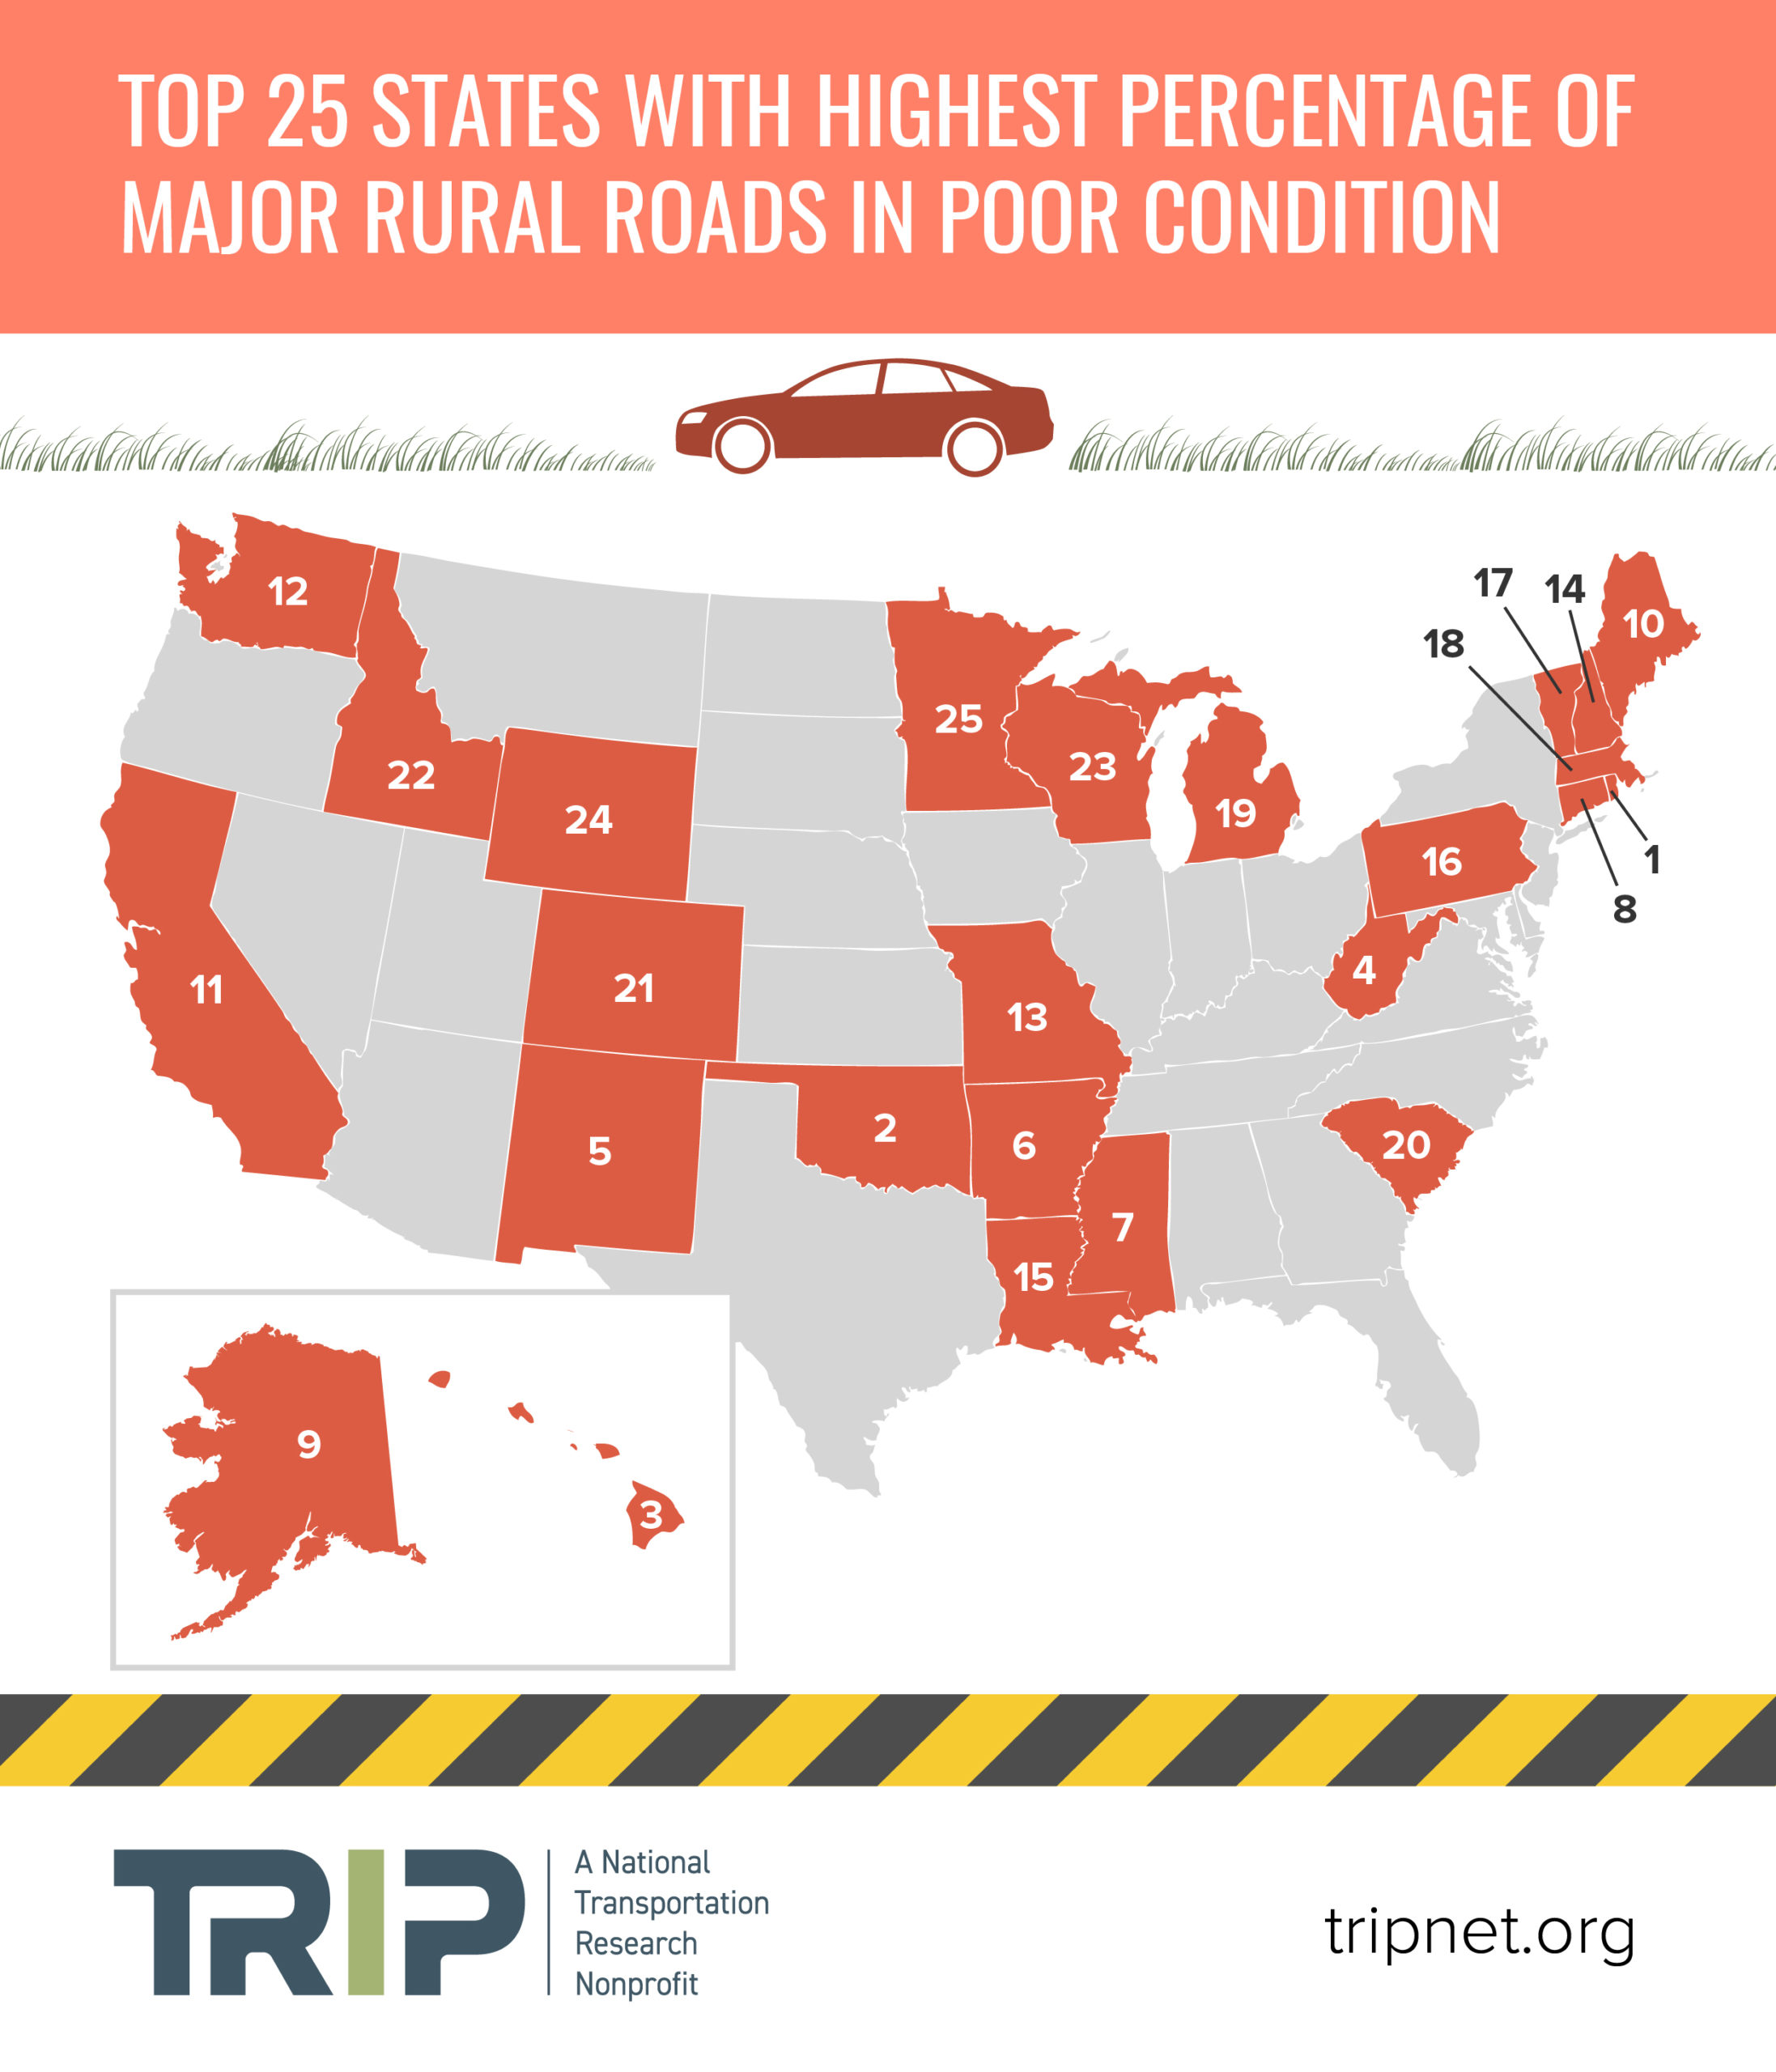 Rural Roads Report 2020: Top 25 States with Highest Percentage of Major Rural Roads in Poor Condition Infographic